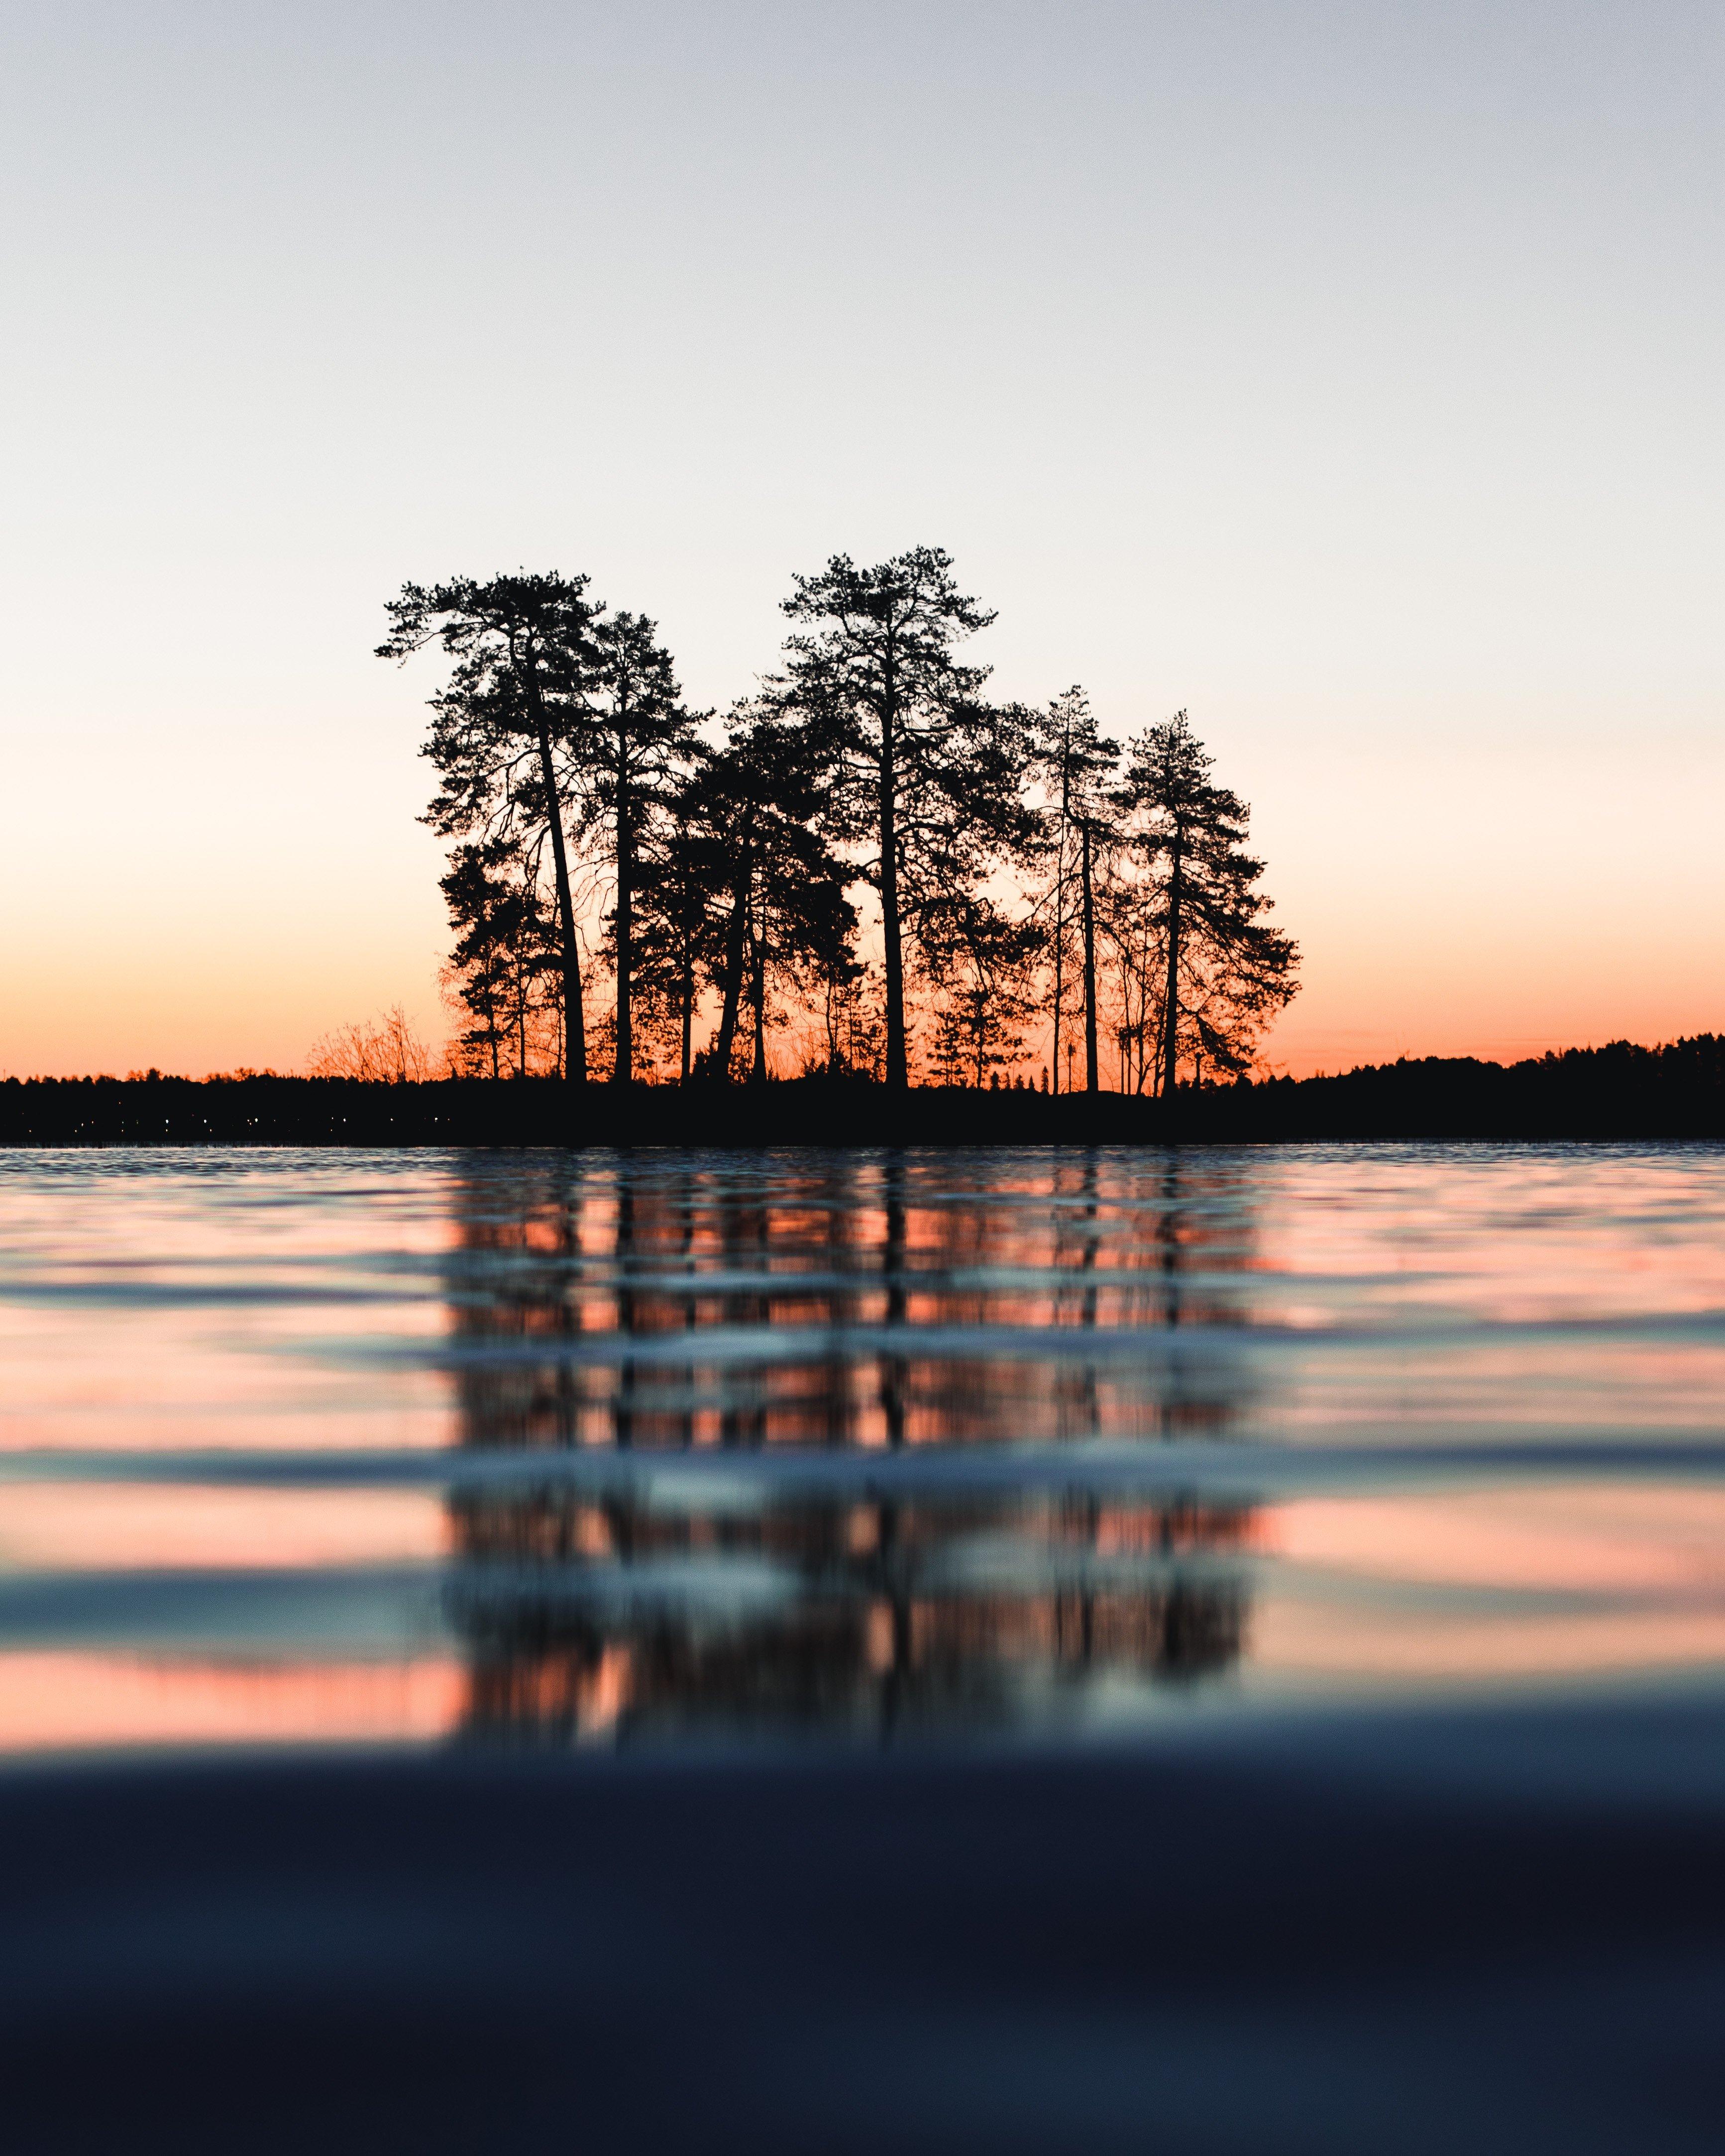 Finland 4K wallpaper for your desktop or mobile screen free and easy to download